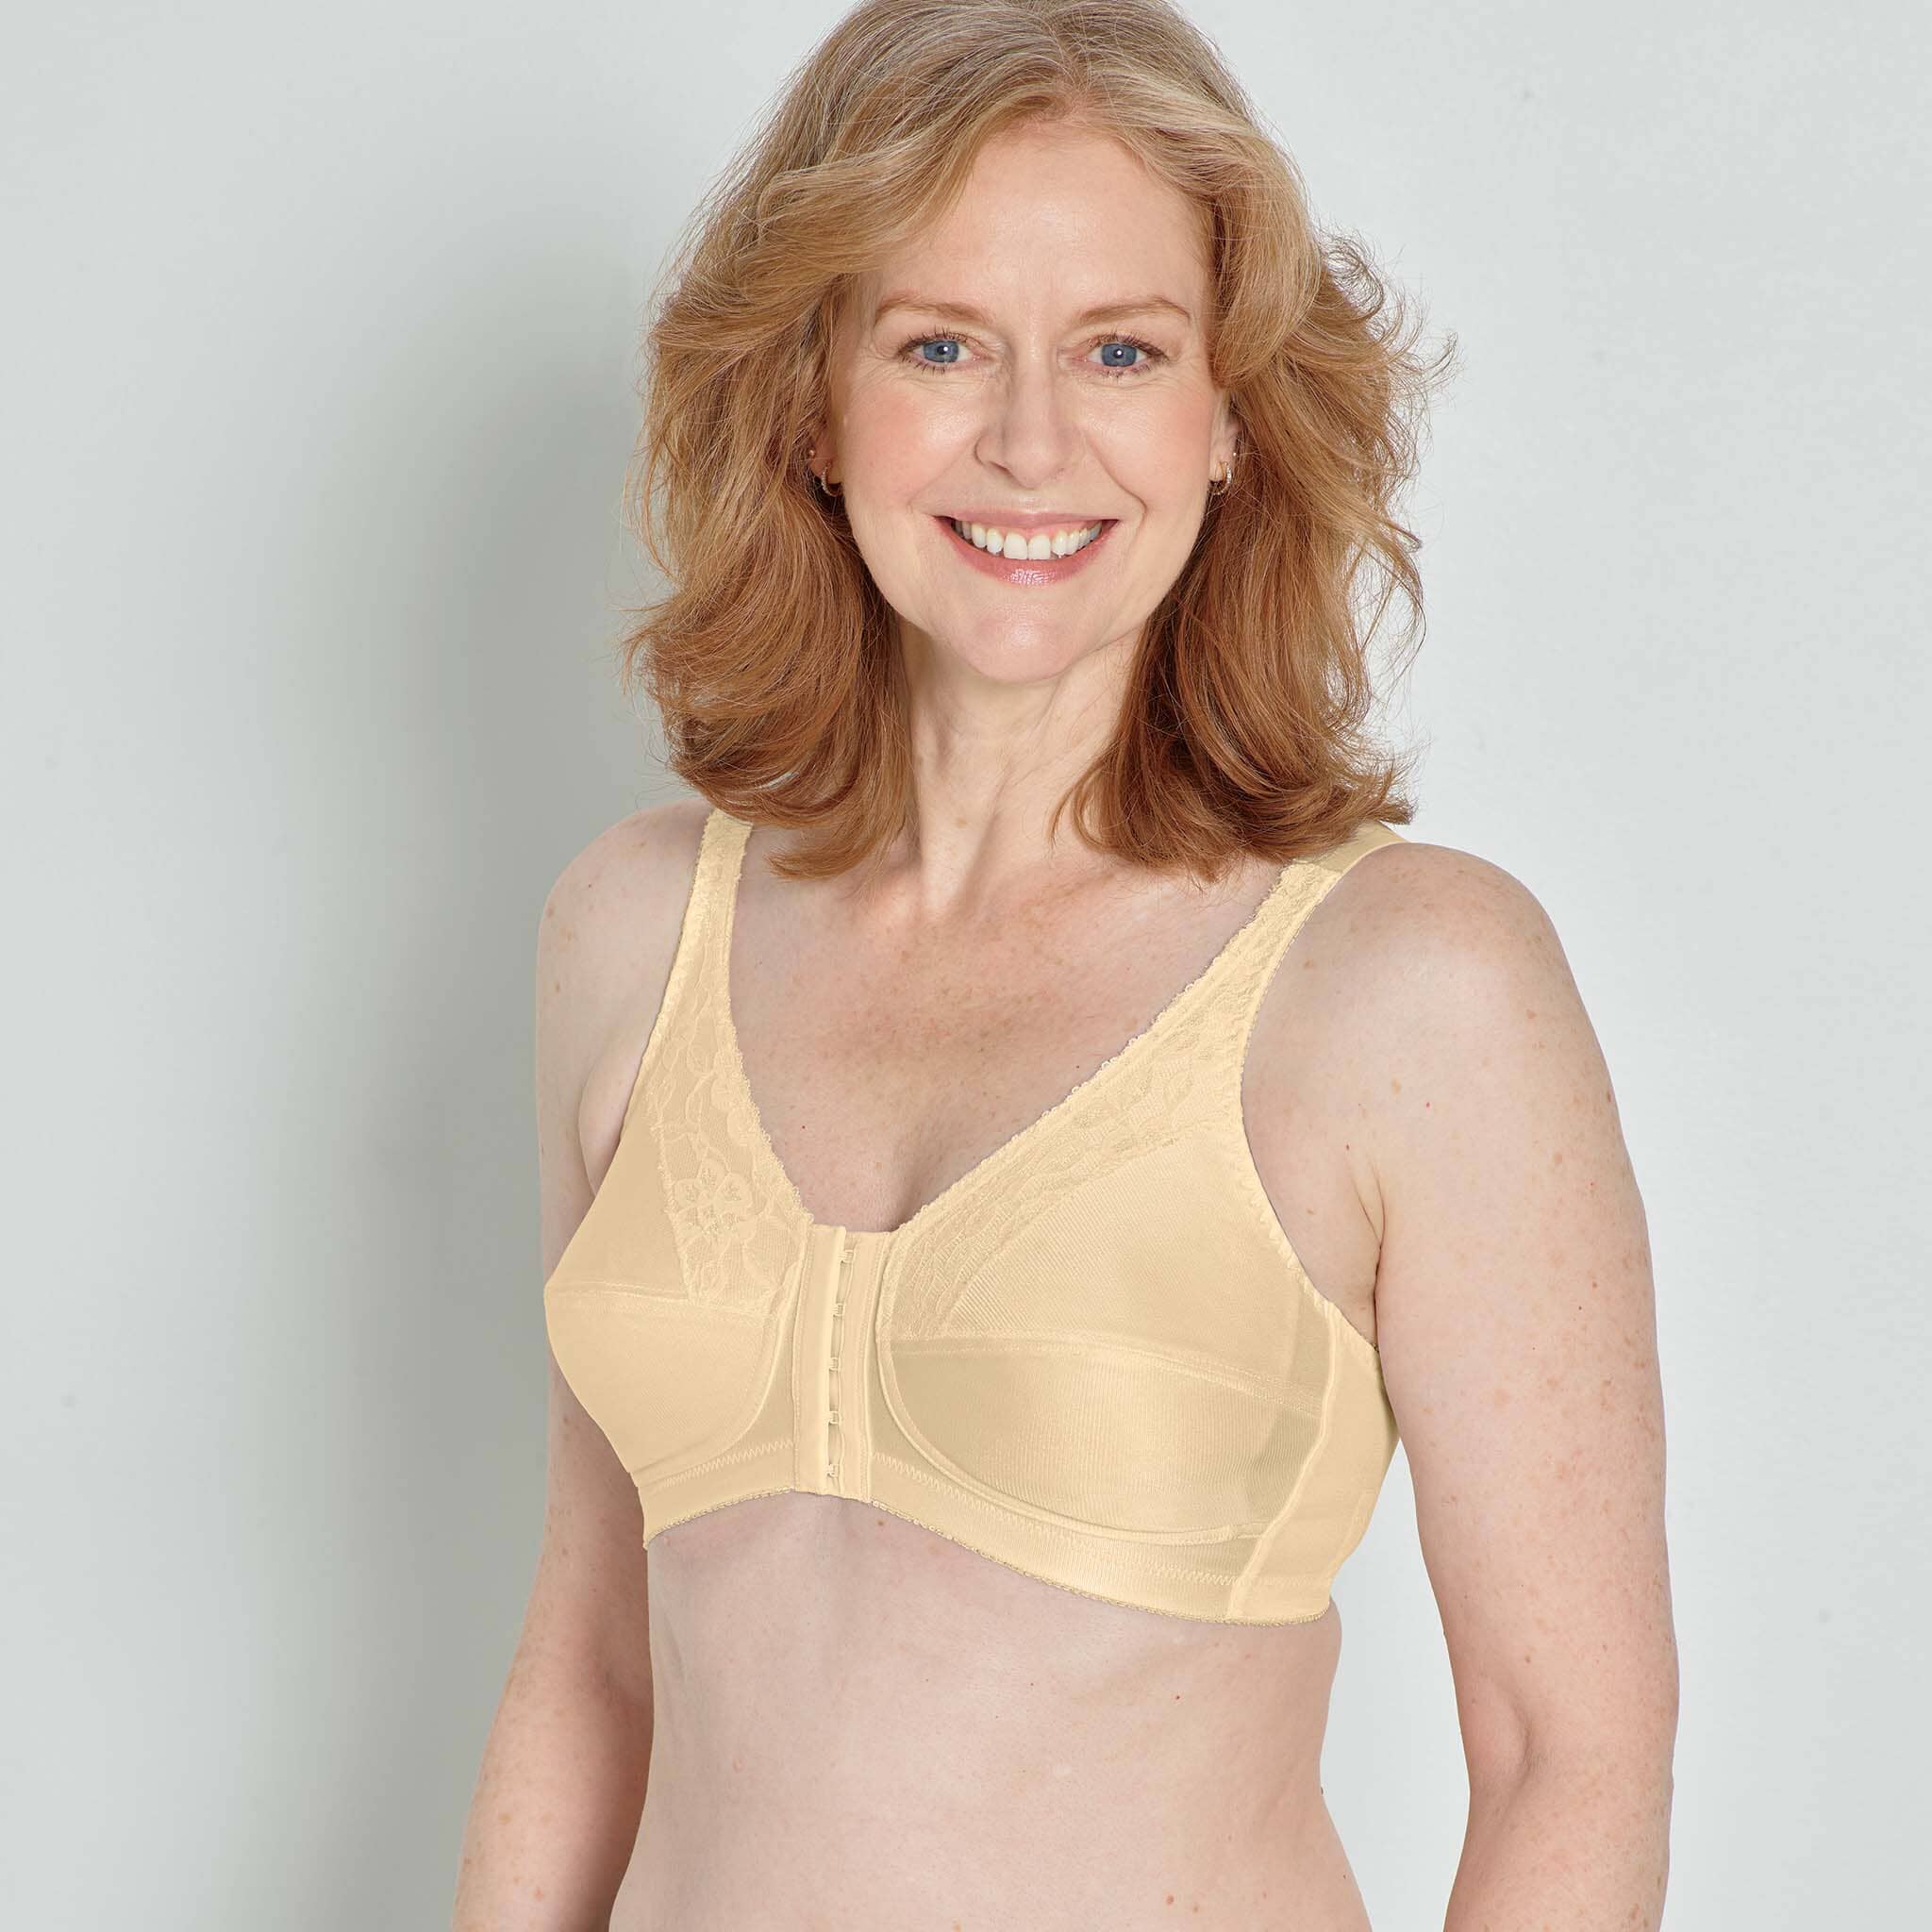 Front Closure Mastectomy Bras for Women Wireless Soft Cup Cotton